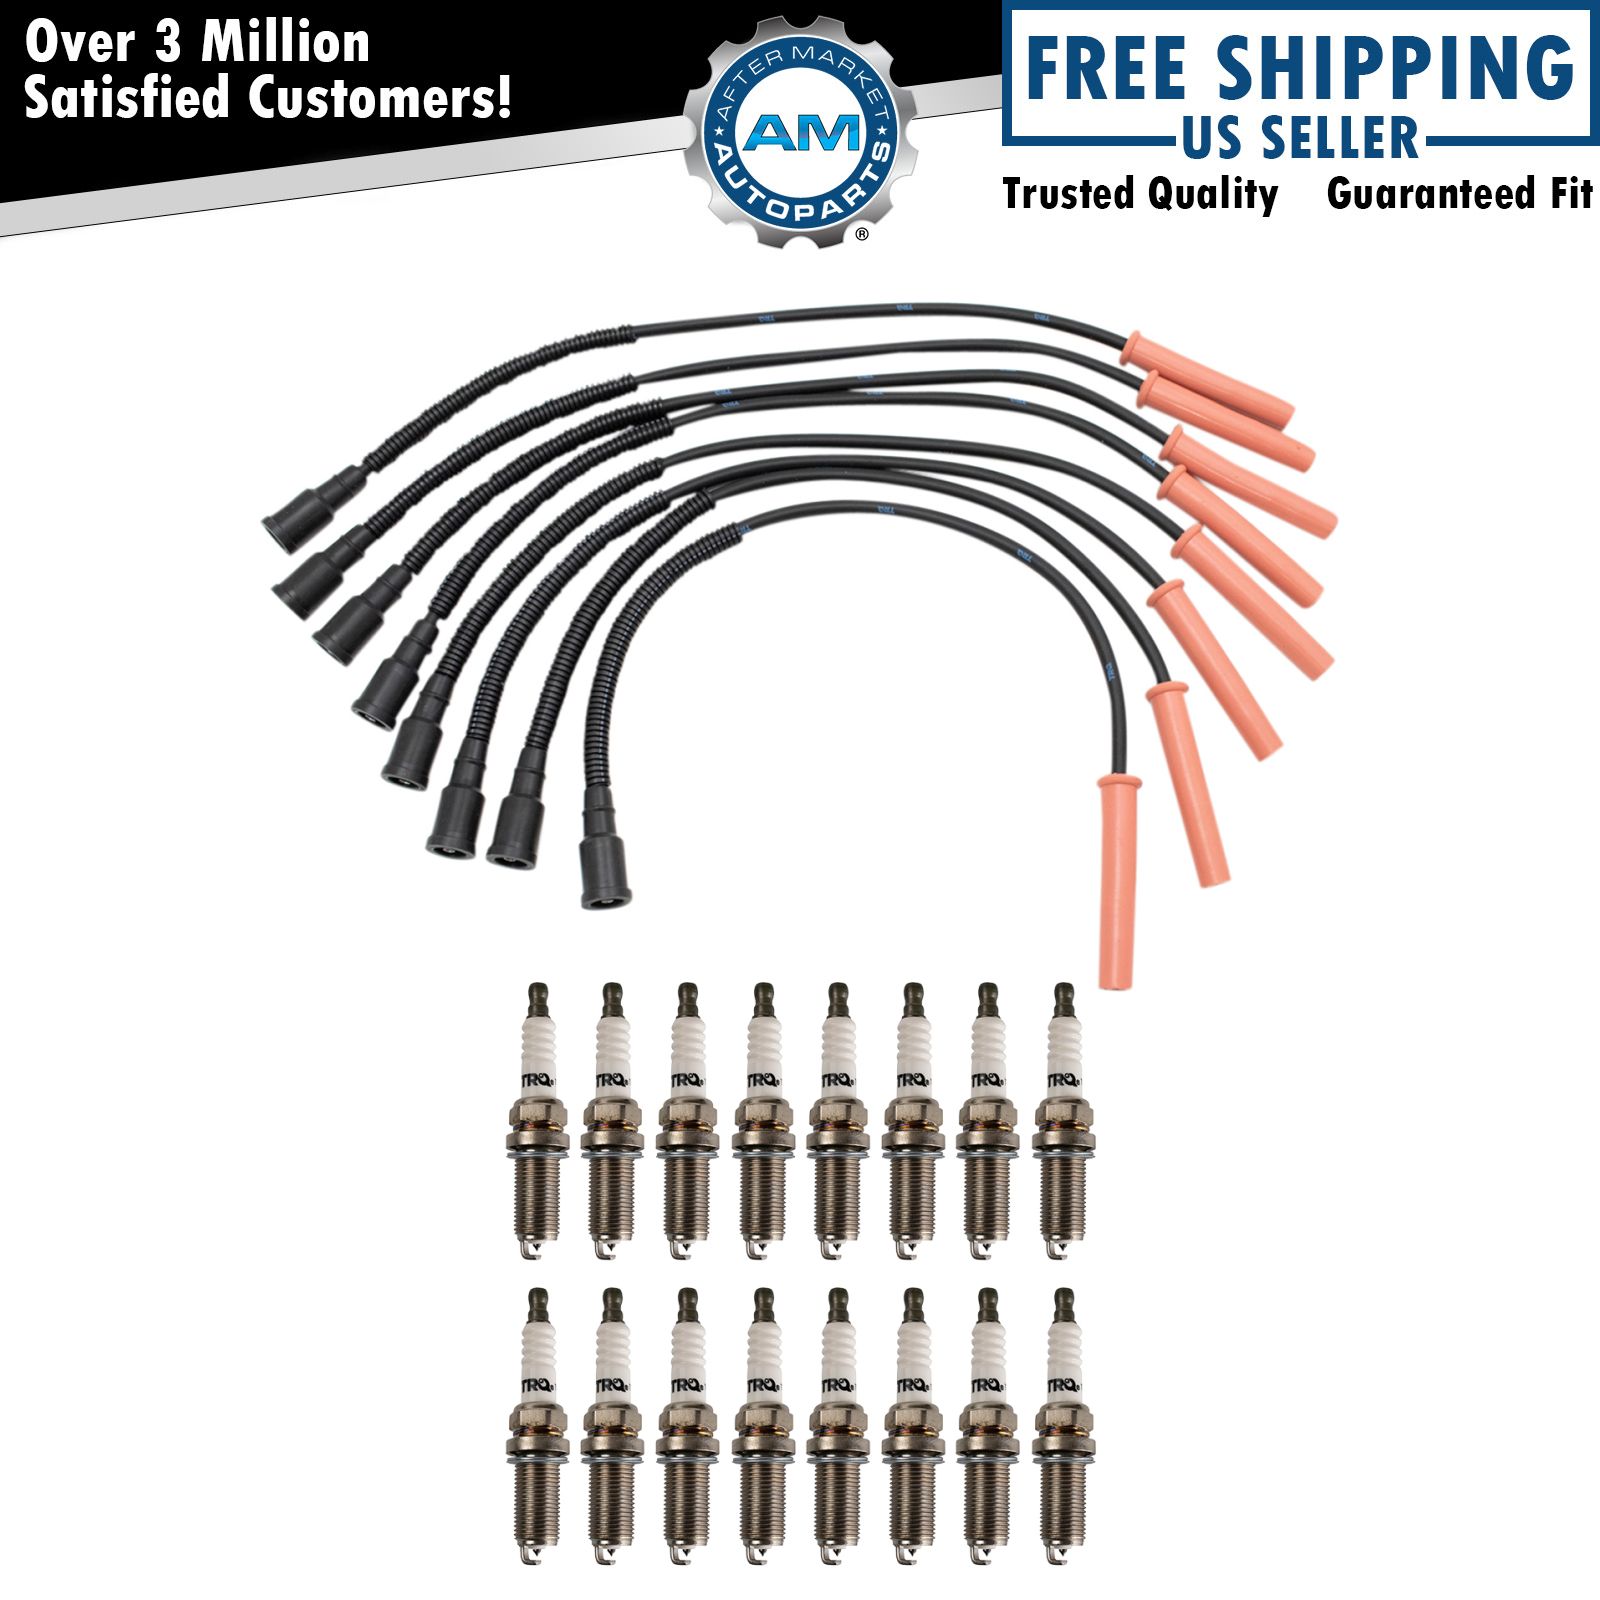 Ignition Kit Spark Plug & Wire Set For Ford F150 F250 F350 Pickup Truck 6.2